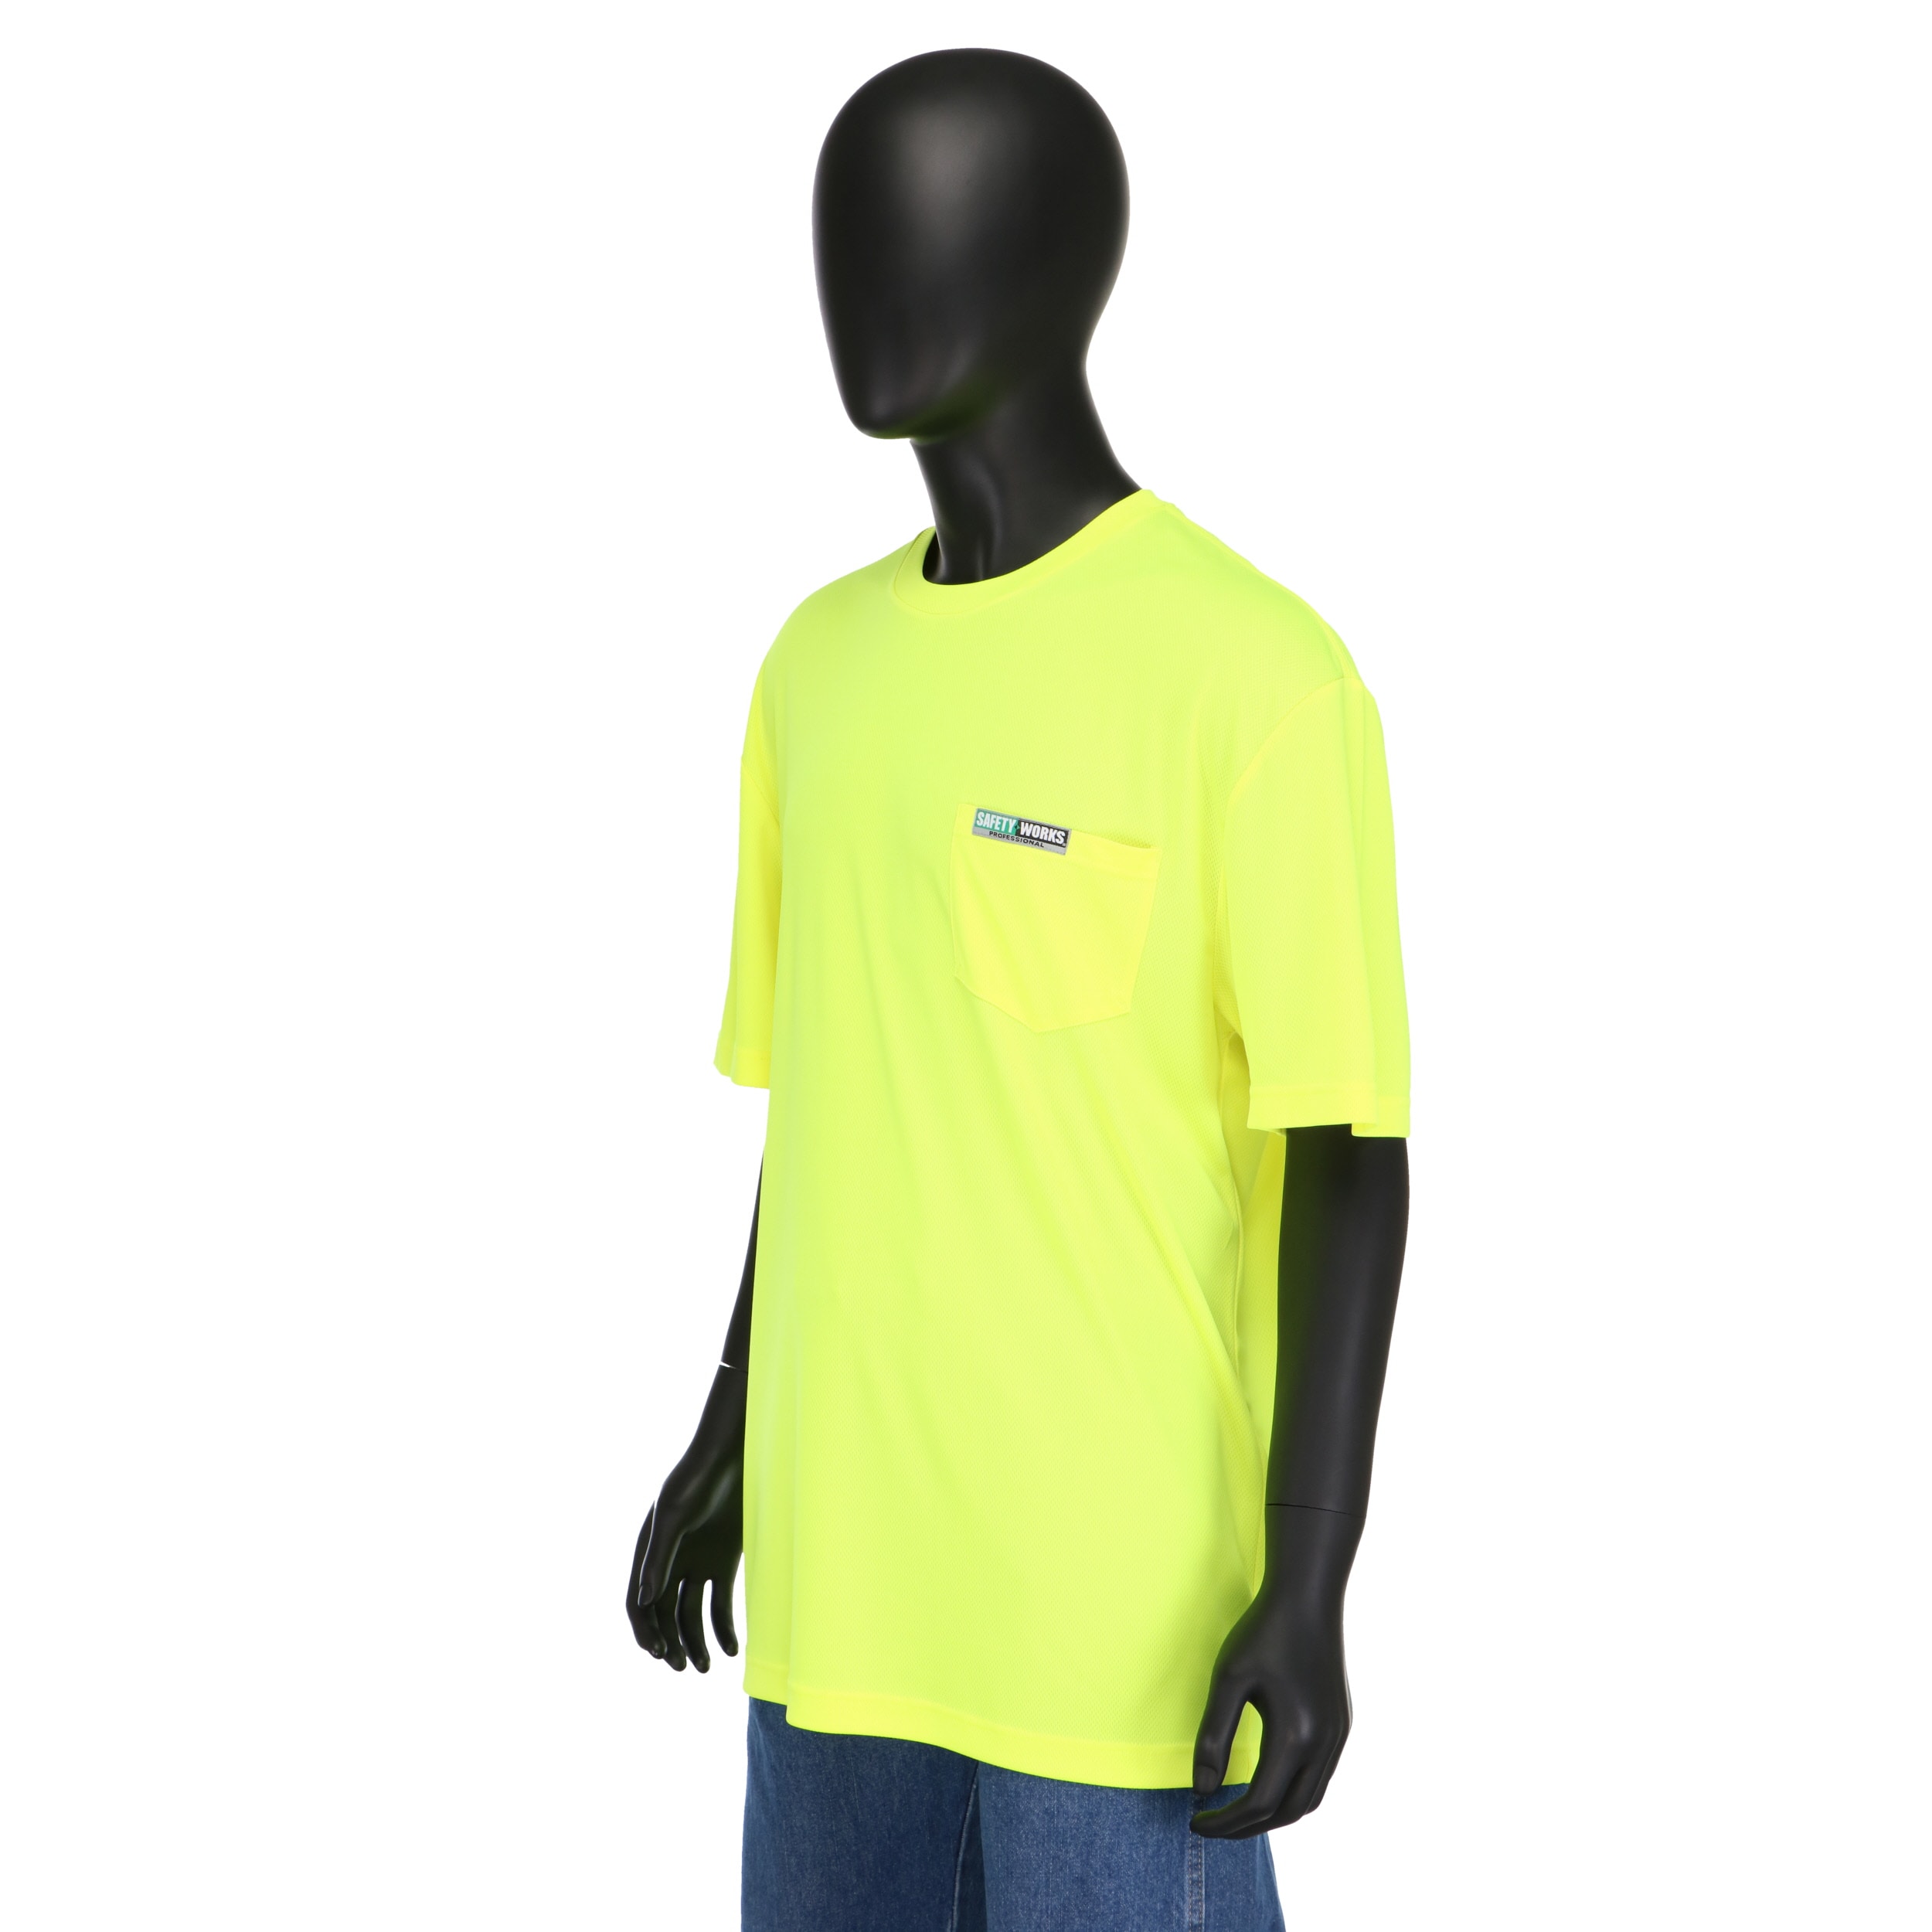 Men's 2X-Large Yellow High Visibility Polyester Long-Sleeve Safety Shirt